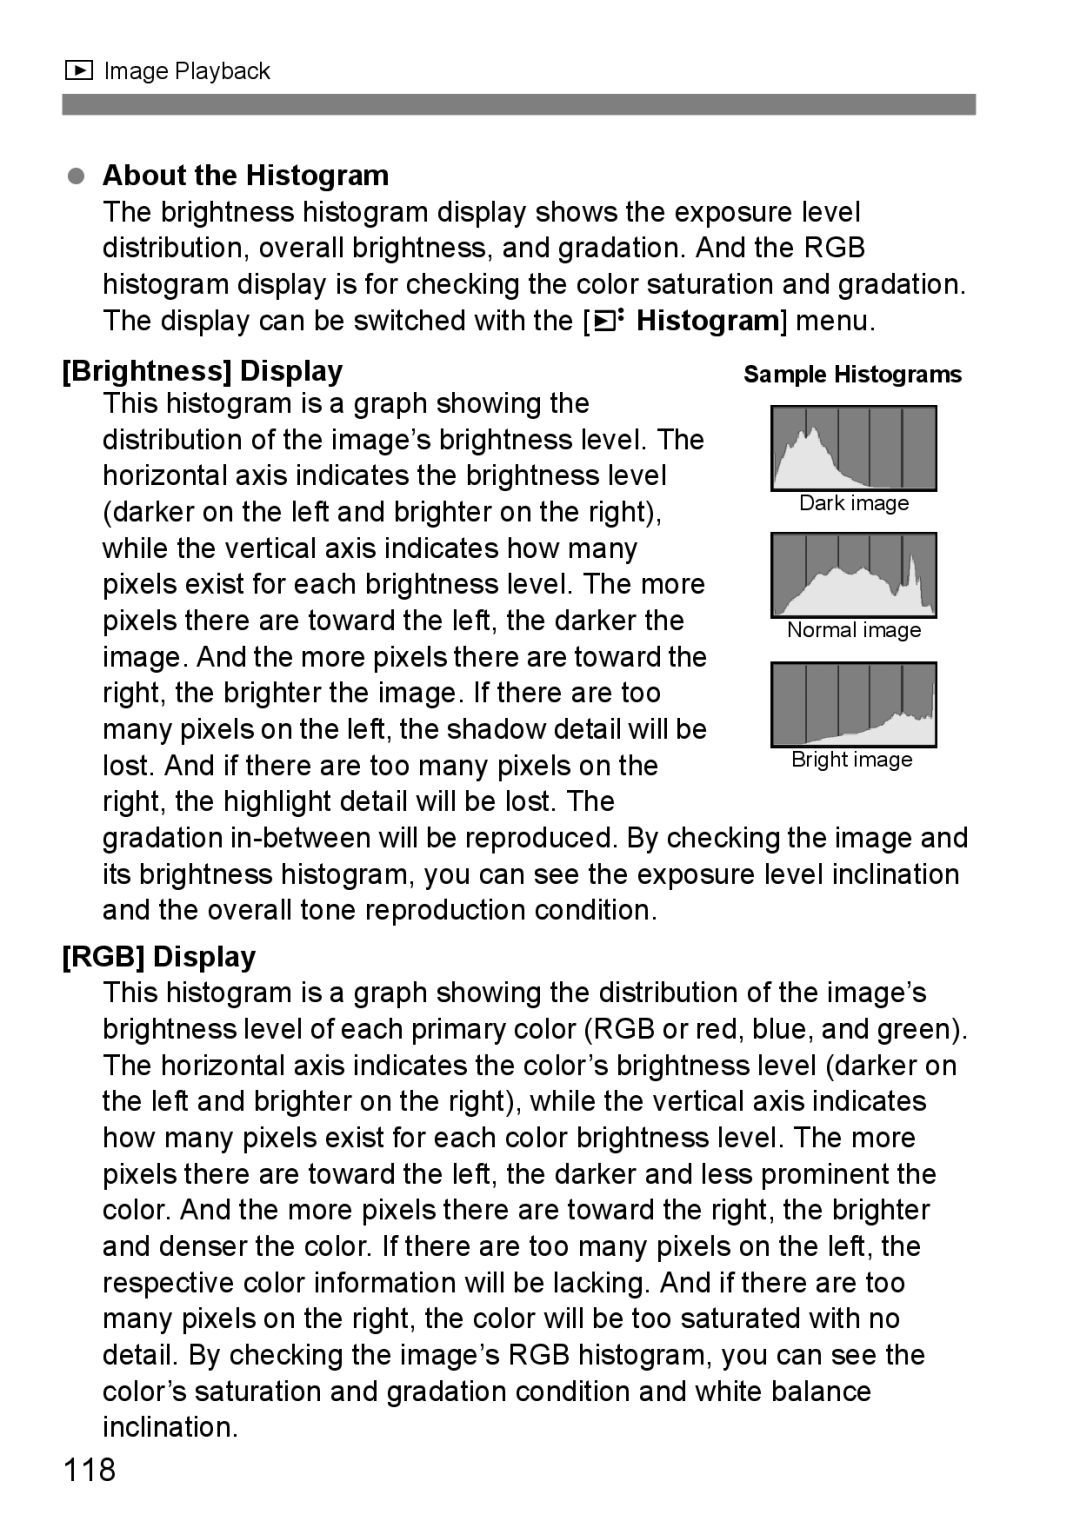 Canon EOS40D instruction manual 118, About the Histogram, Brightness Display, RGB Display 